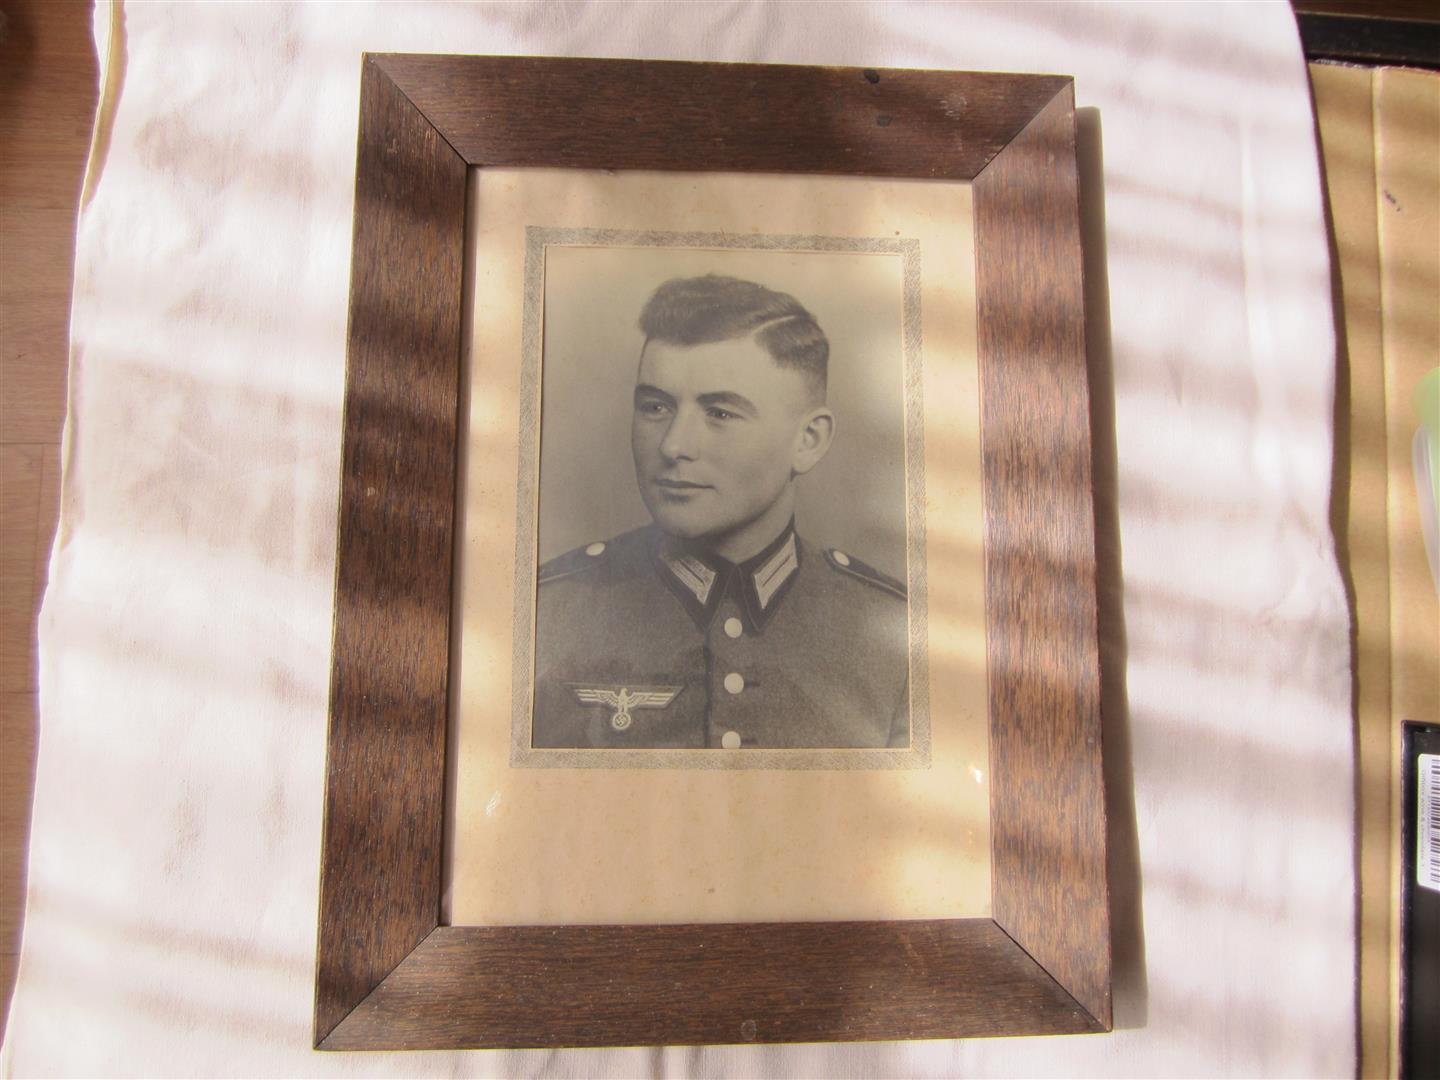 WW2 WH Photo of Soldier in Dress Uniform